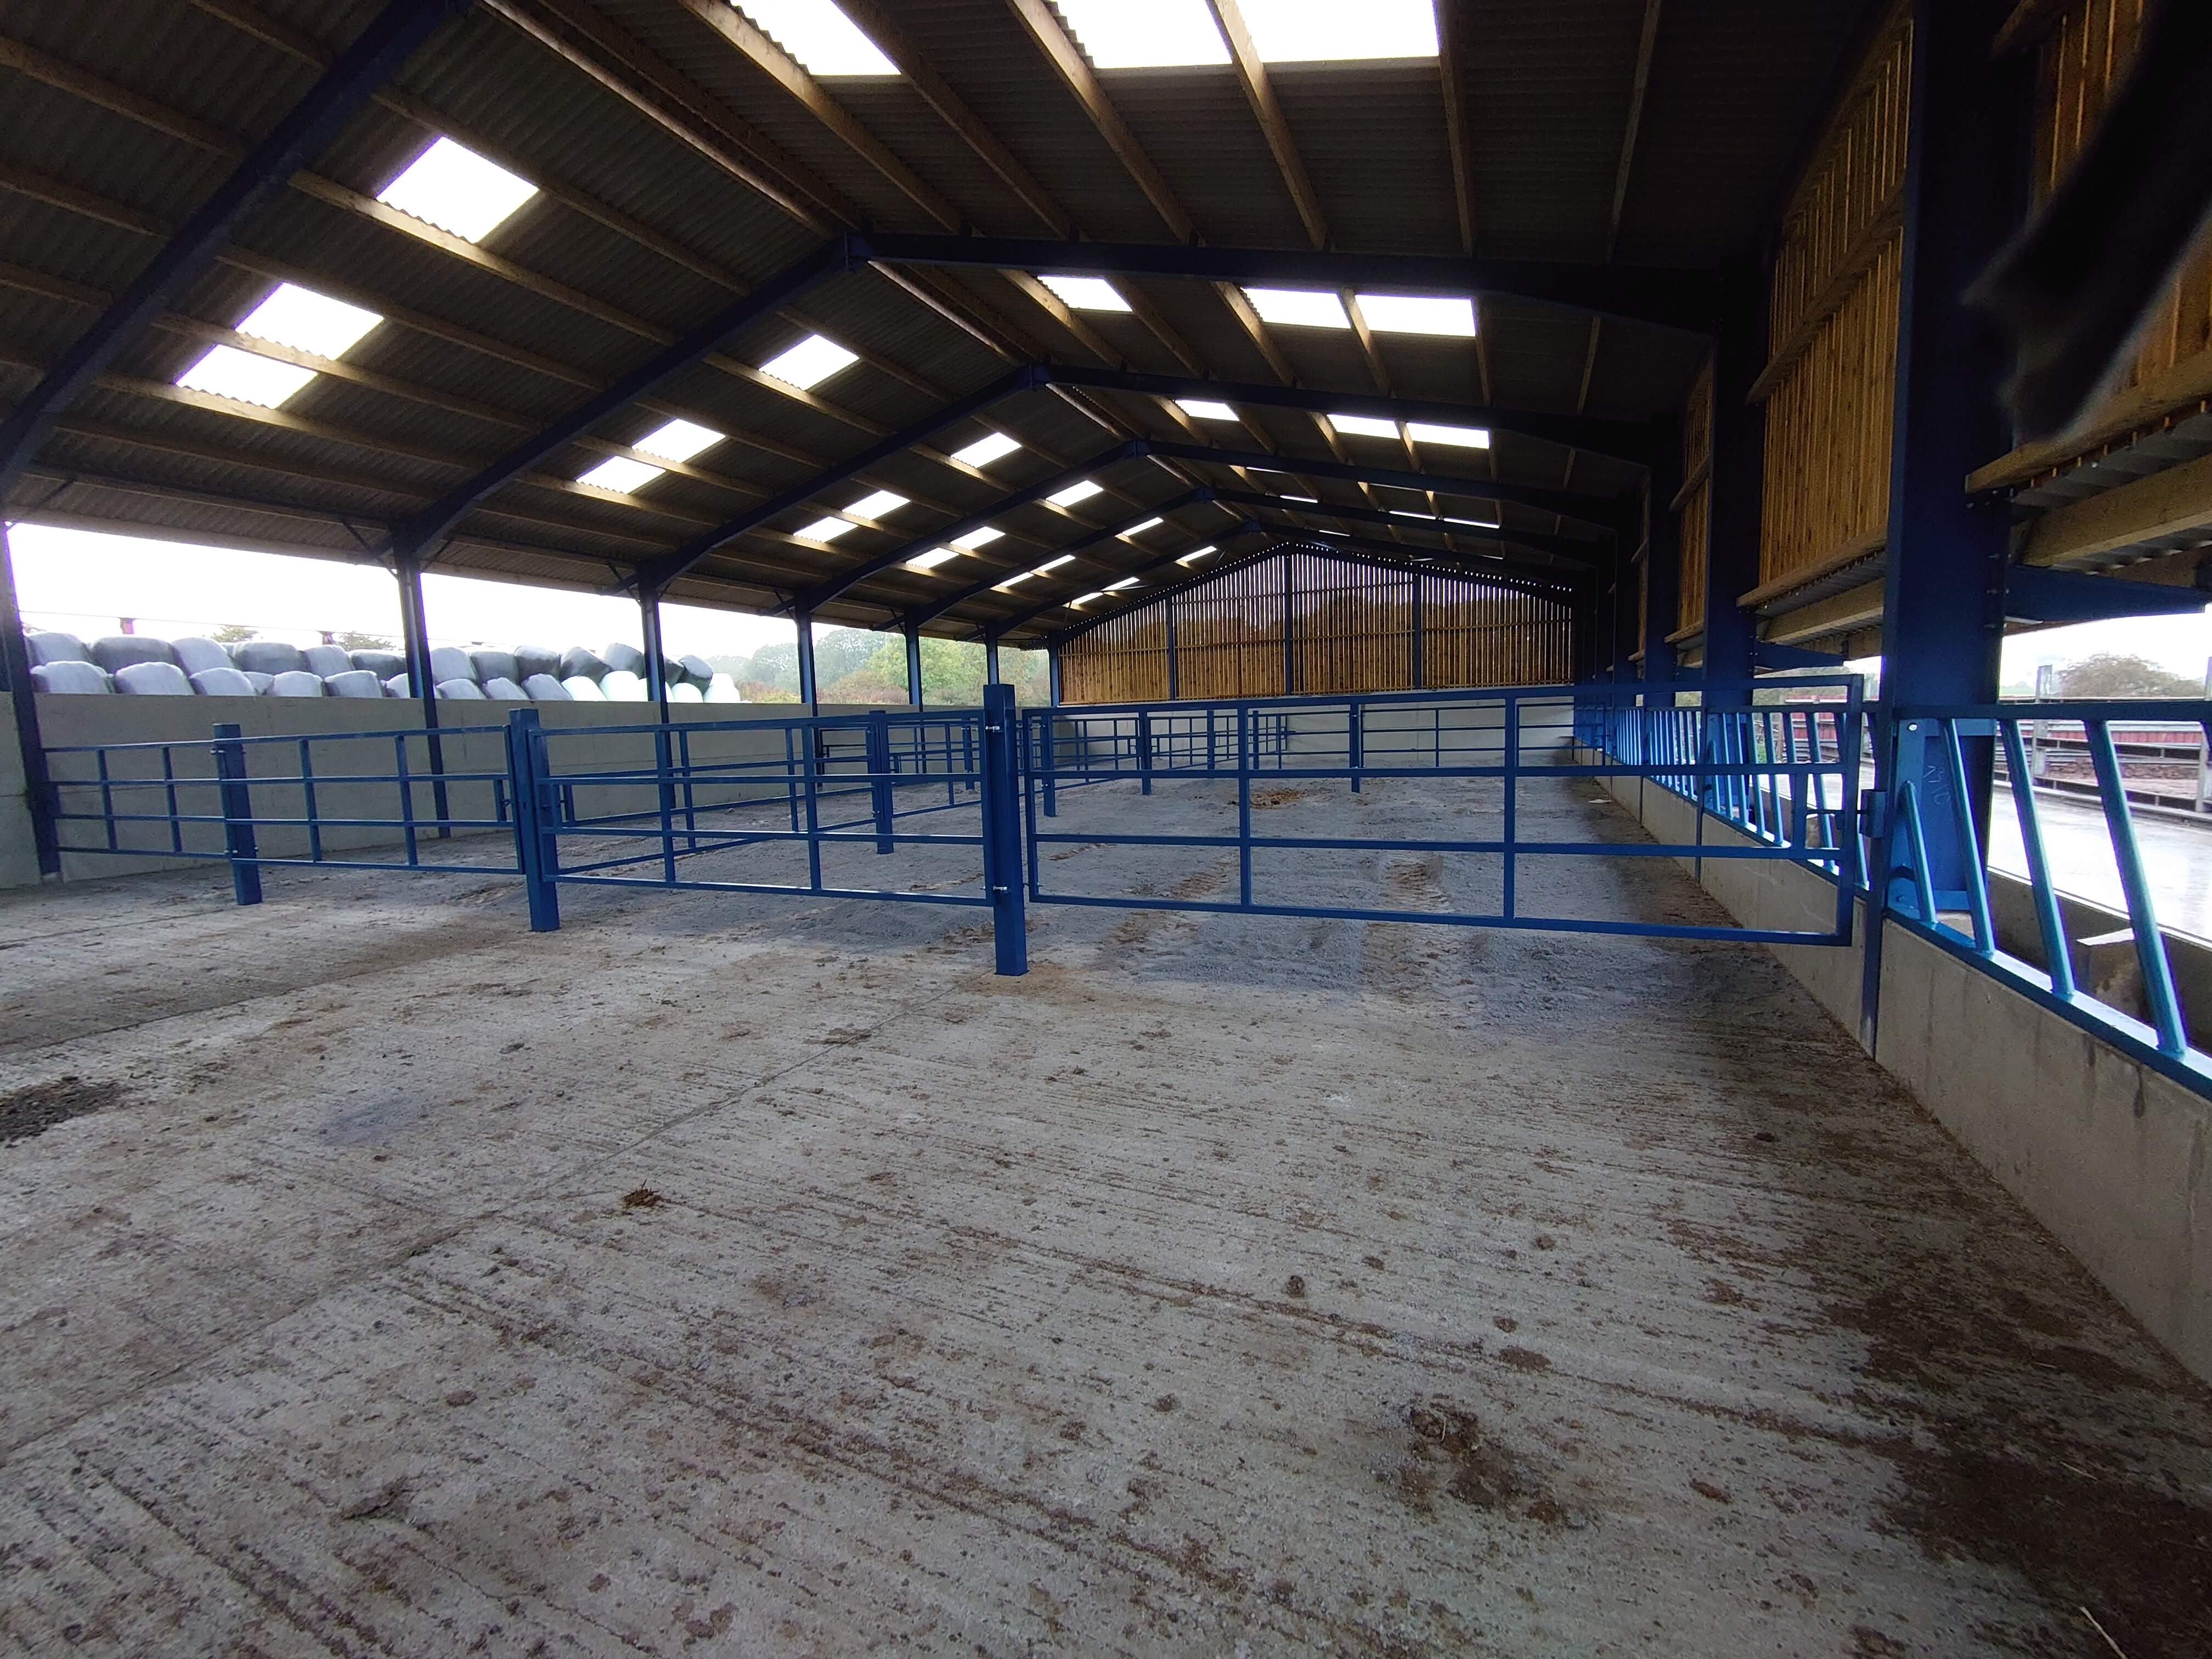 50mm frame gates designed to pen cattle to either the front/back of building for clearing manure